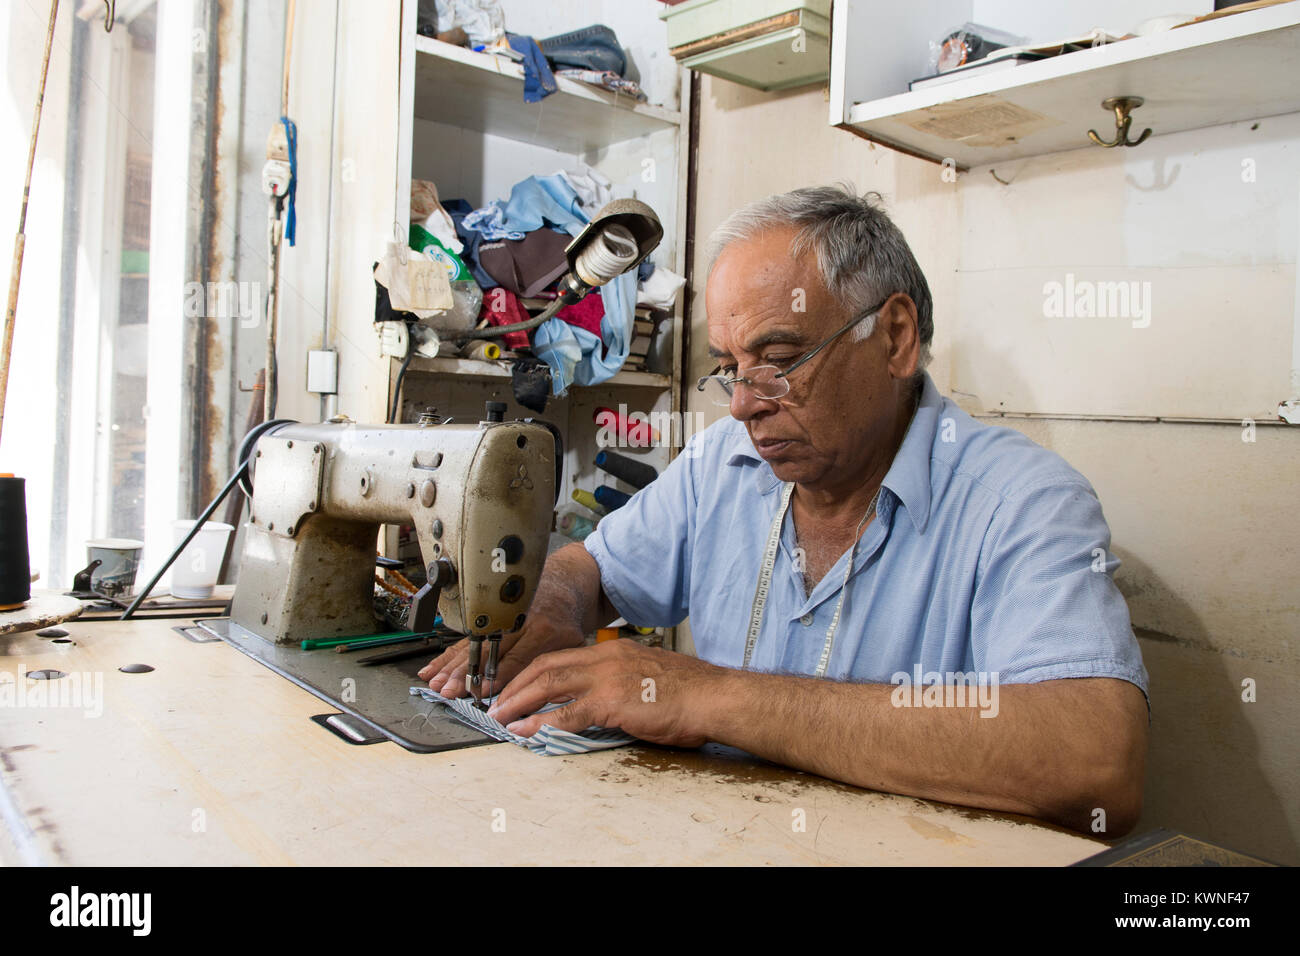 Tailor working with a sewing machine Stock Photo